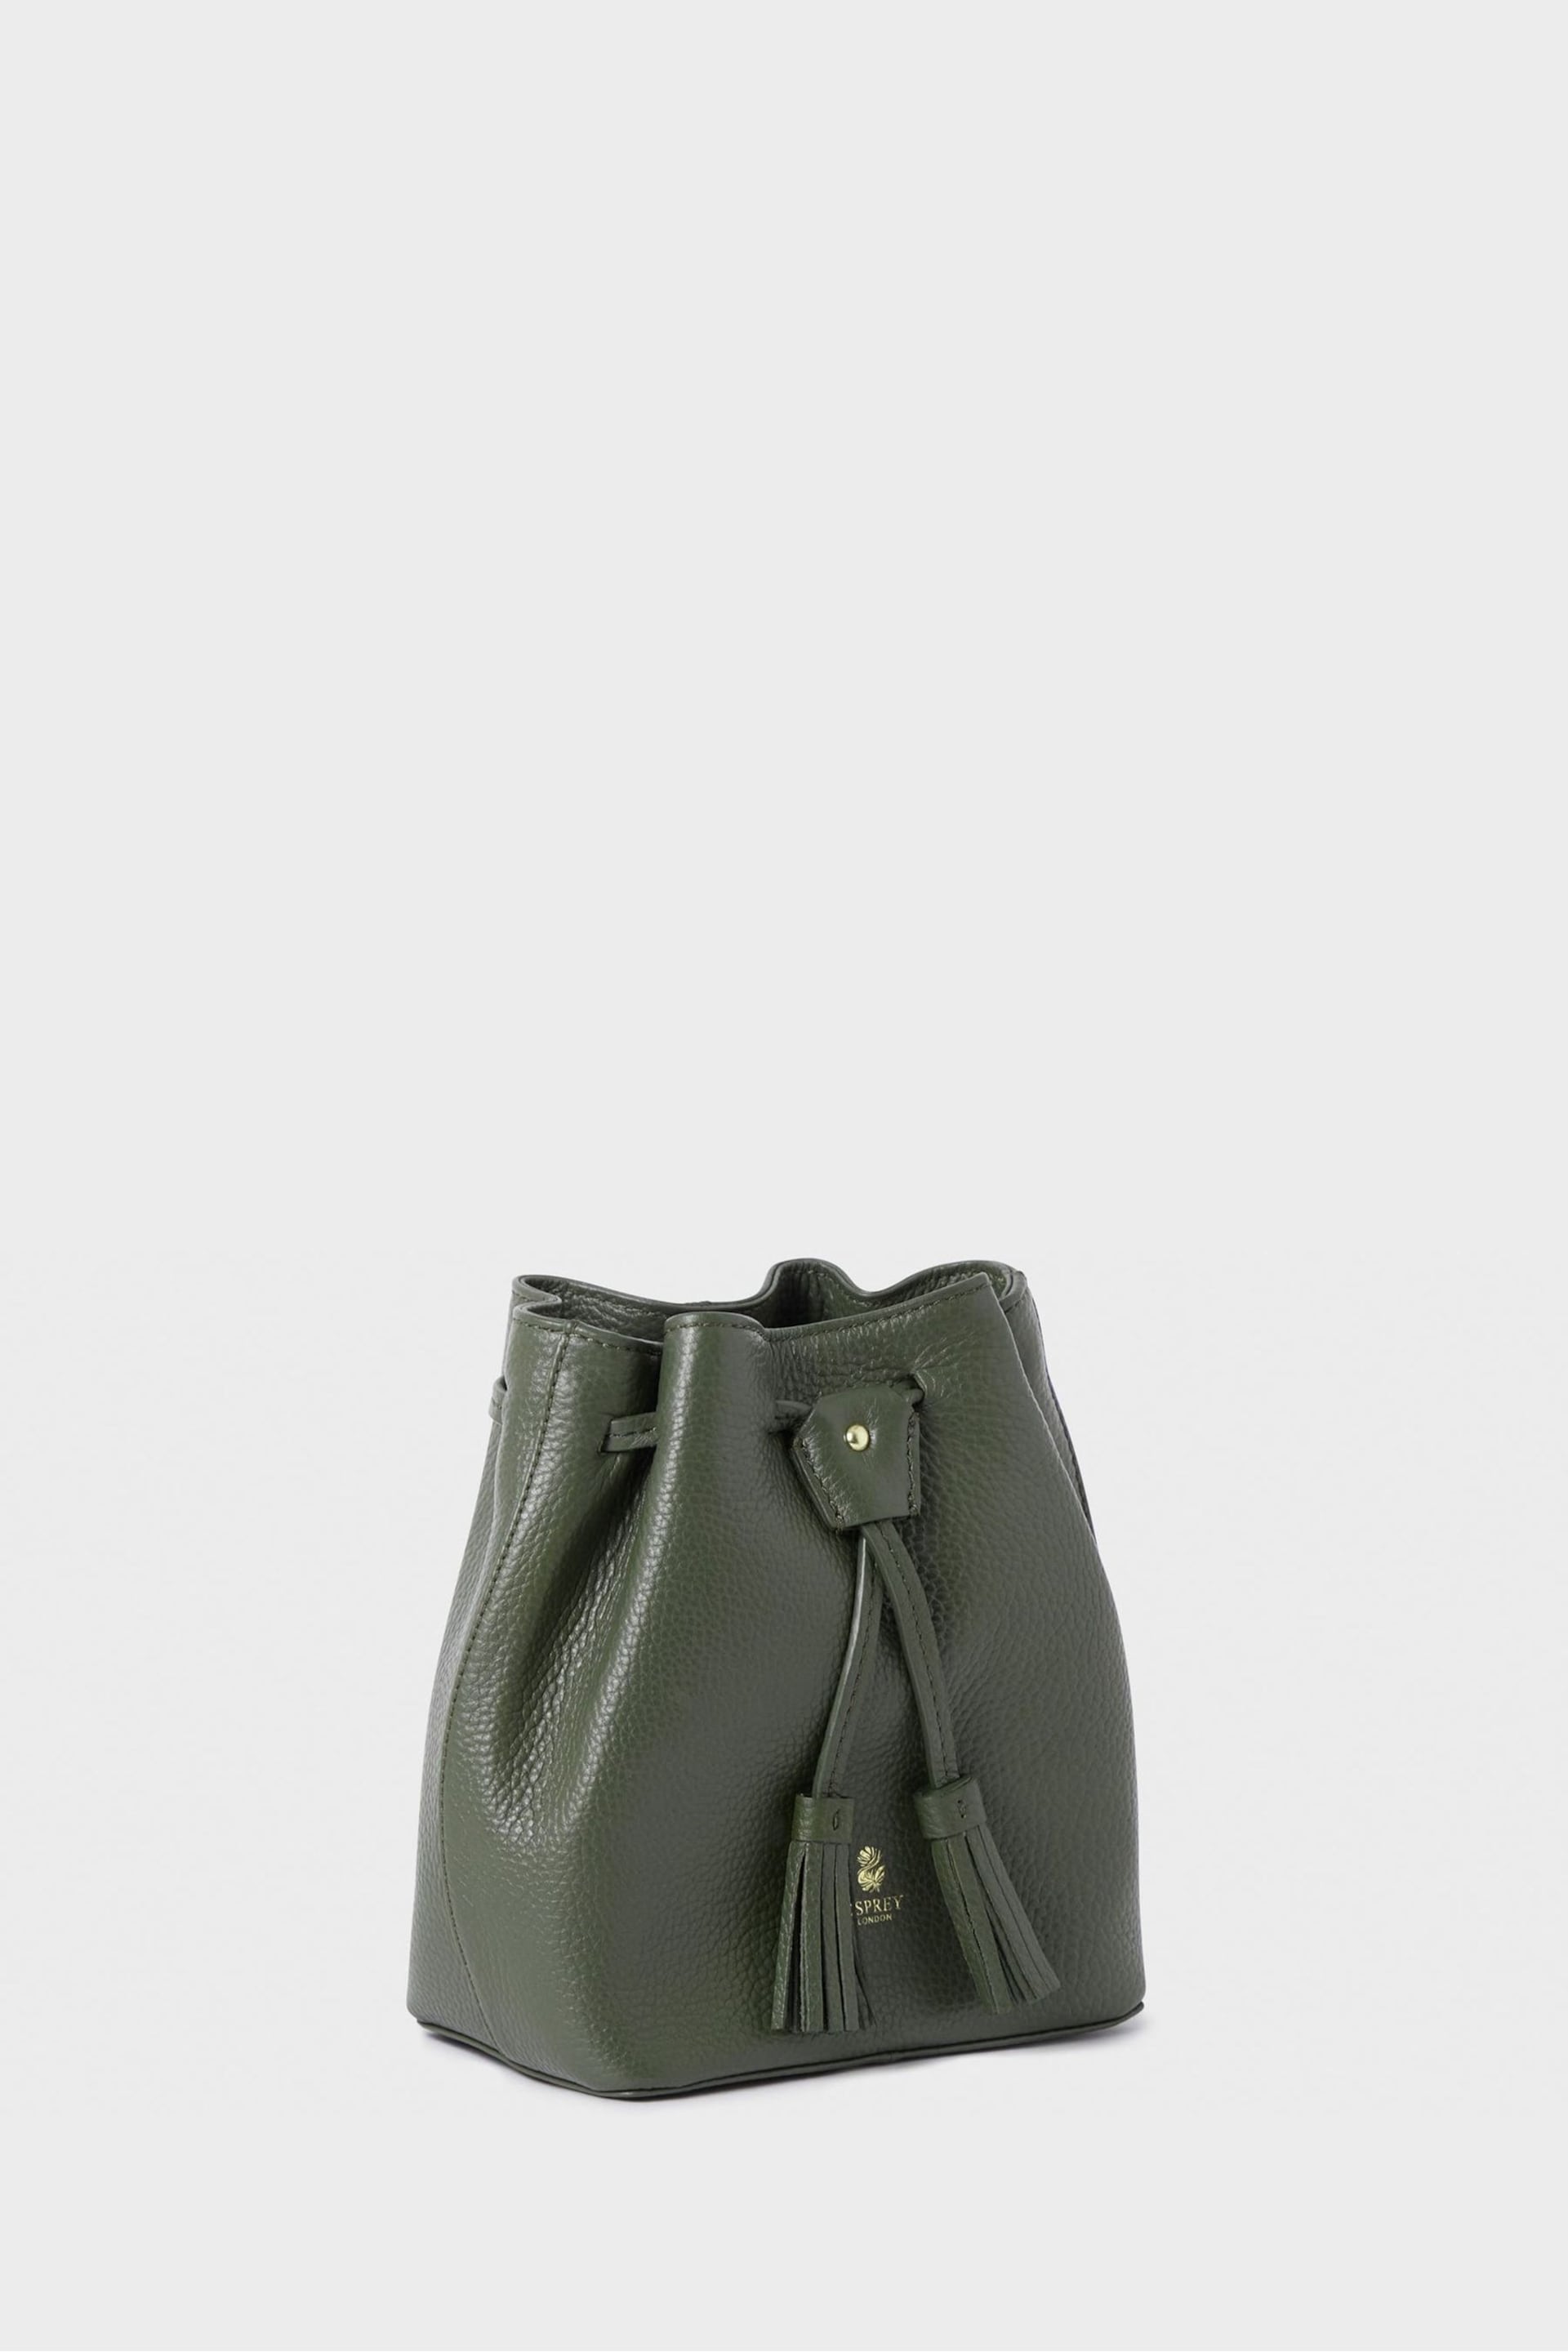 Osprey London The Lucia Leather Cross-Body Bag - Image 2 of 7